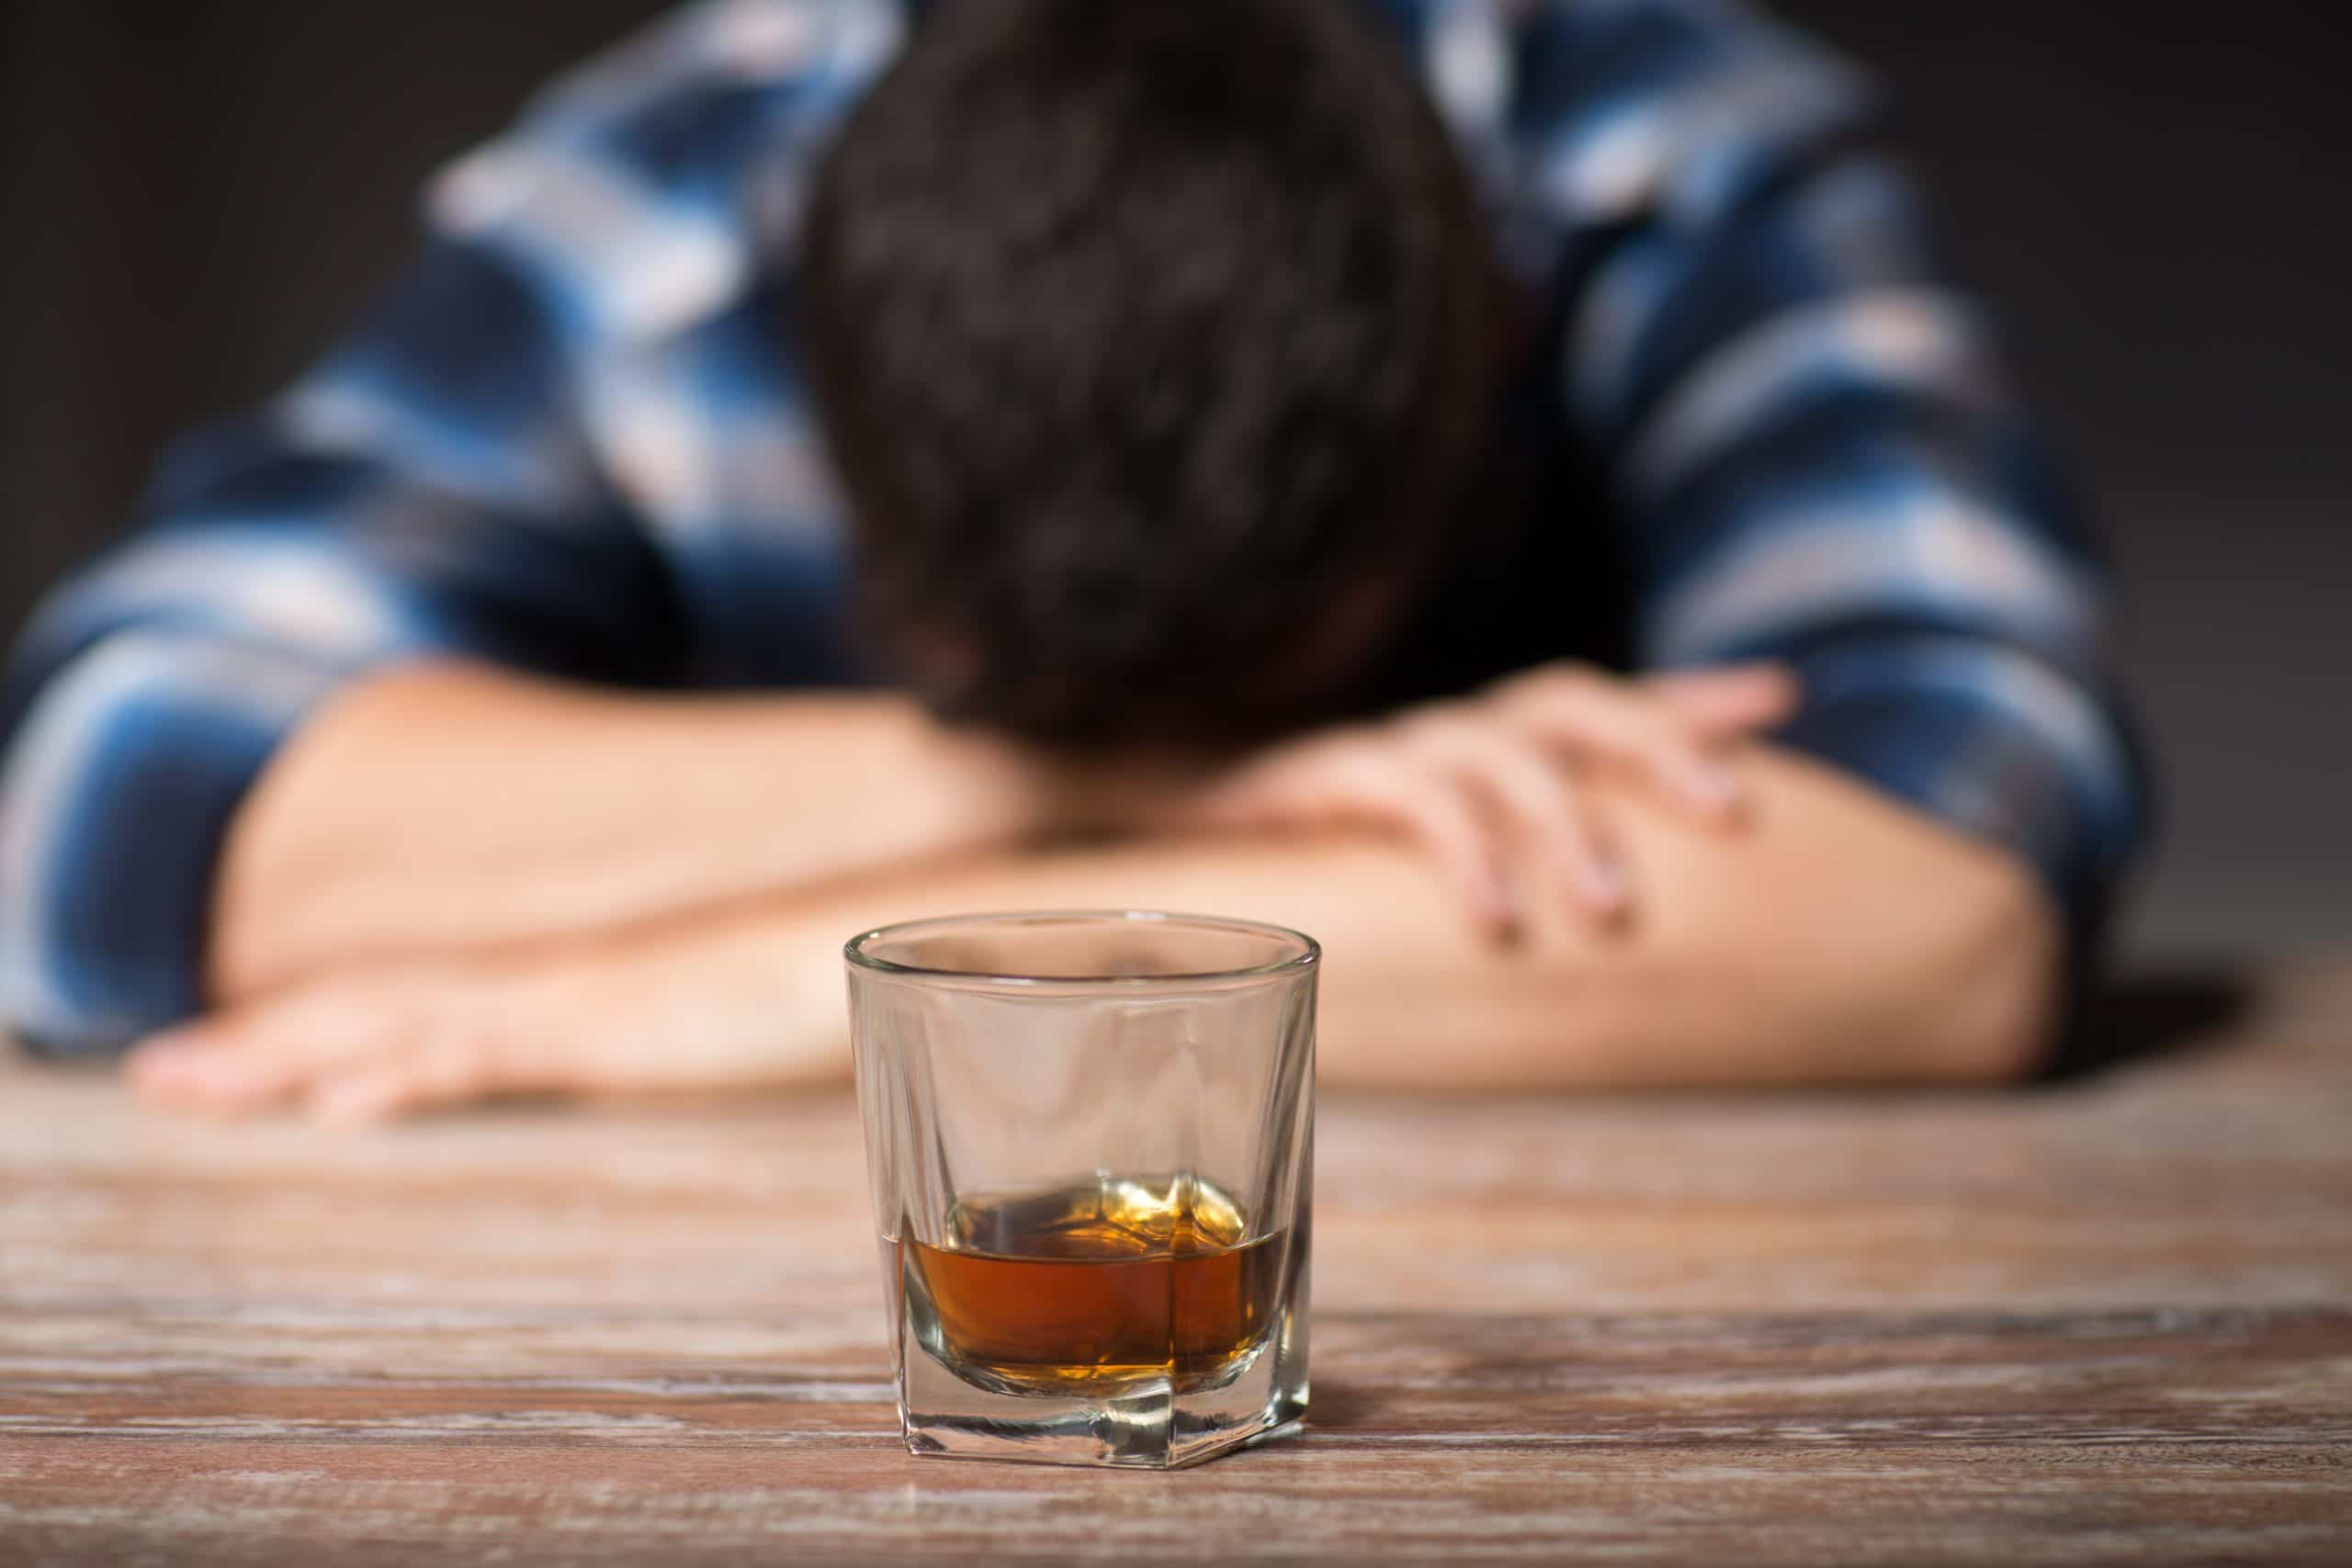 Difference Between Binge Drinking and Alcoholism?